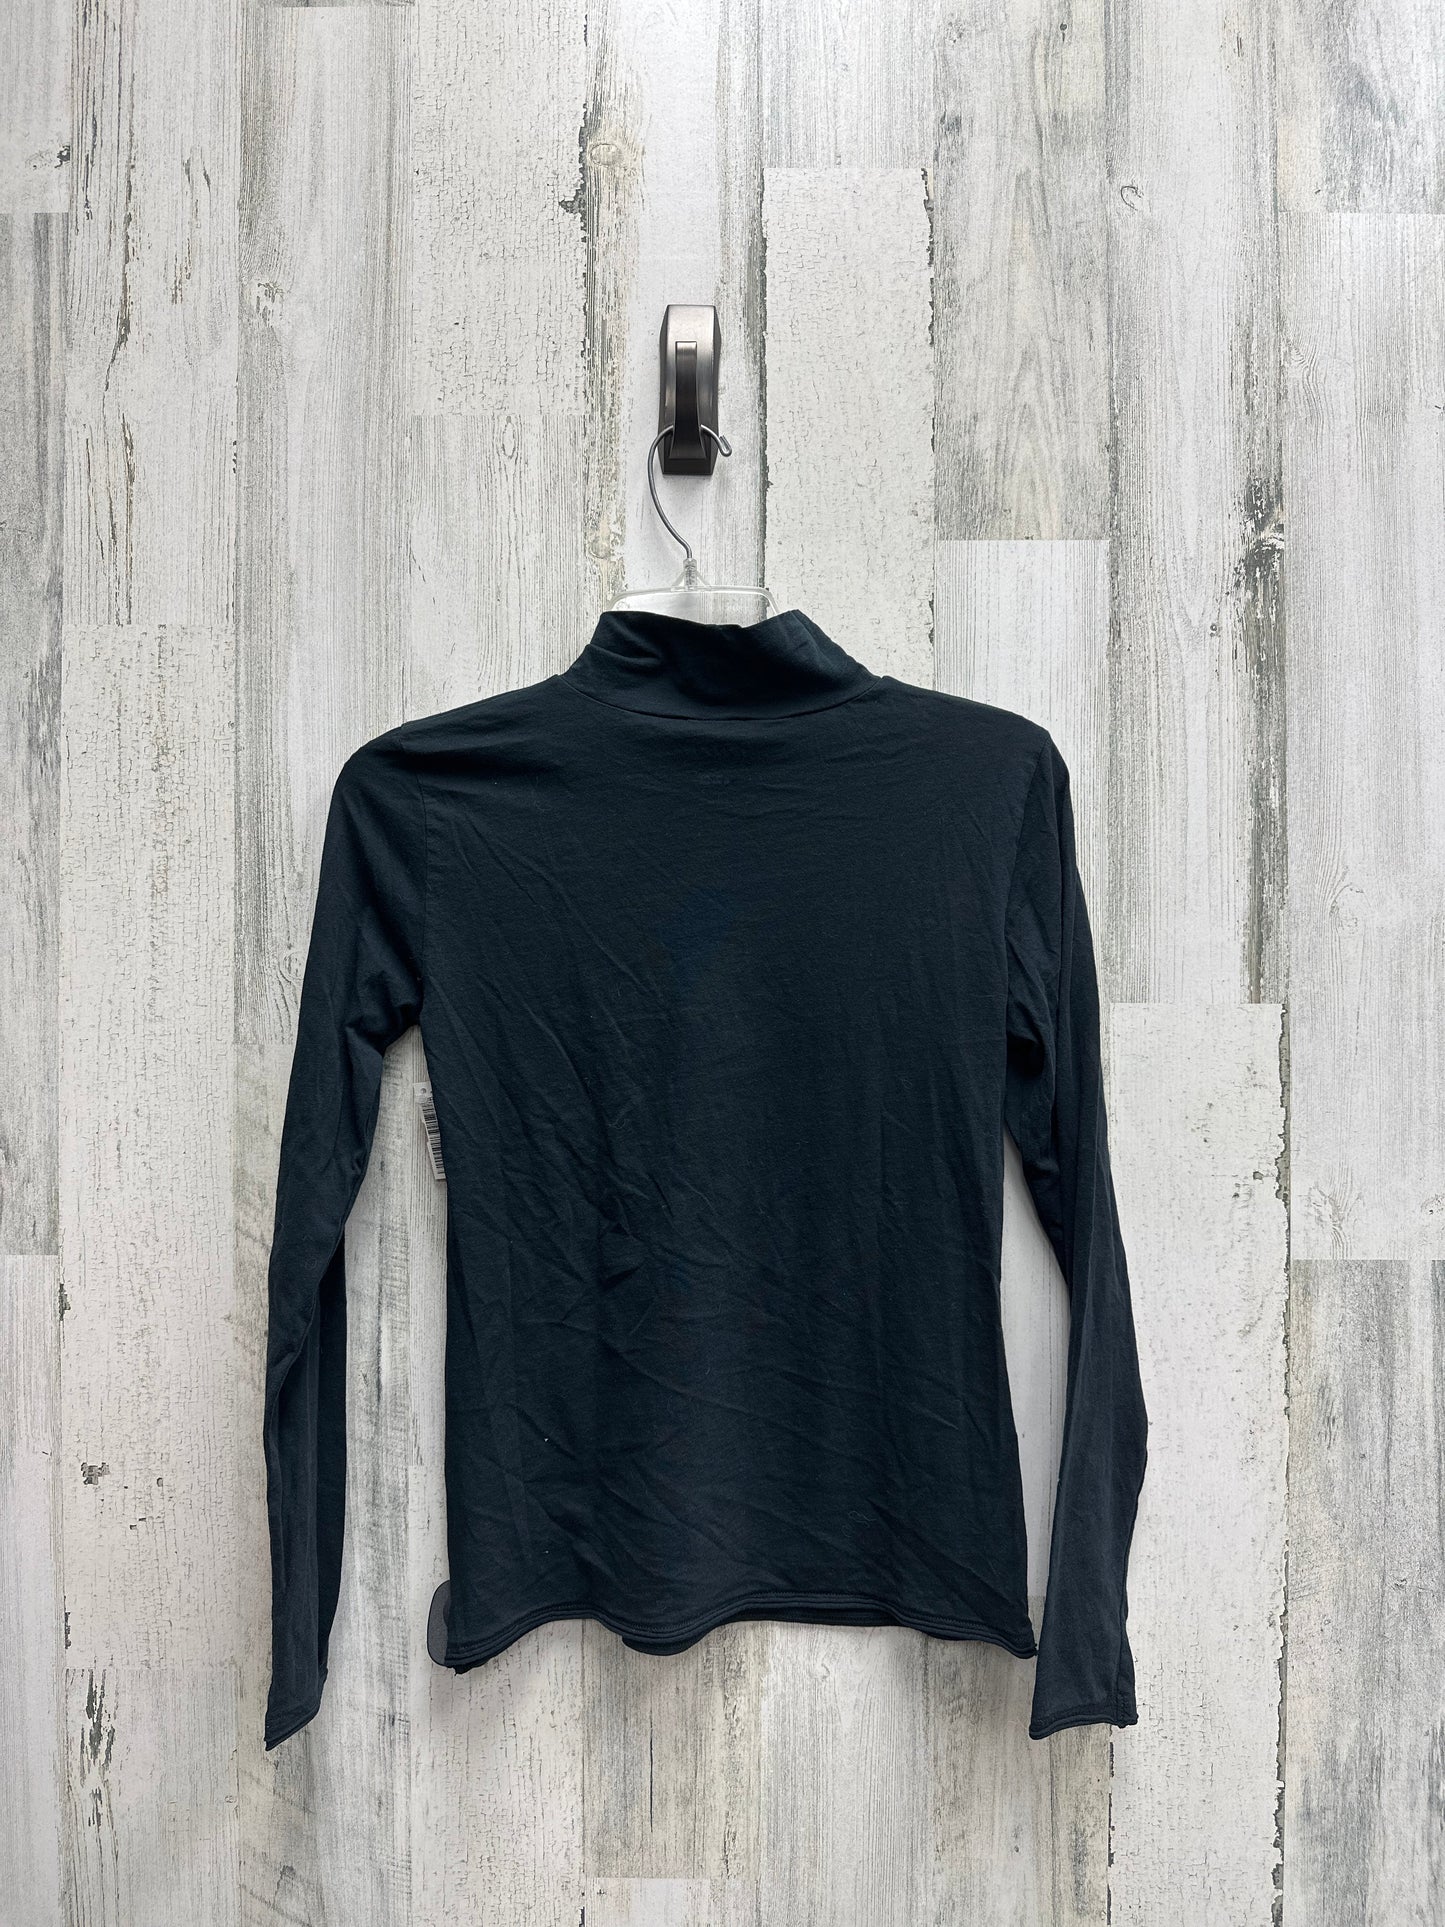 Top Long Sleeve Basic By Anthropologie  Size: Xs